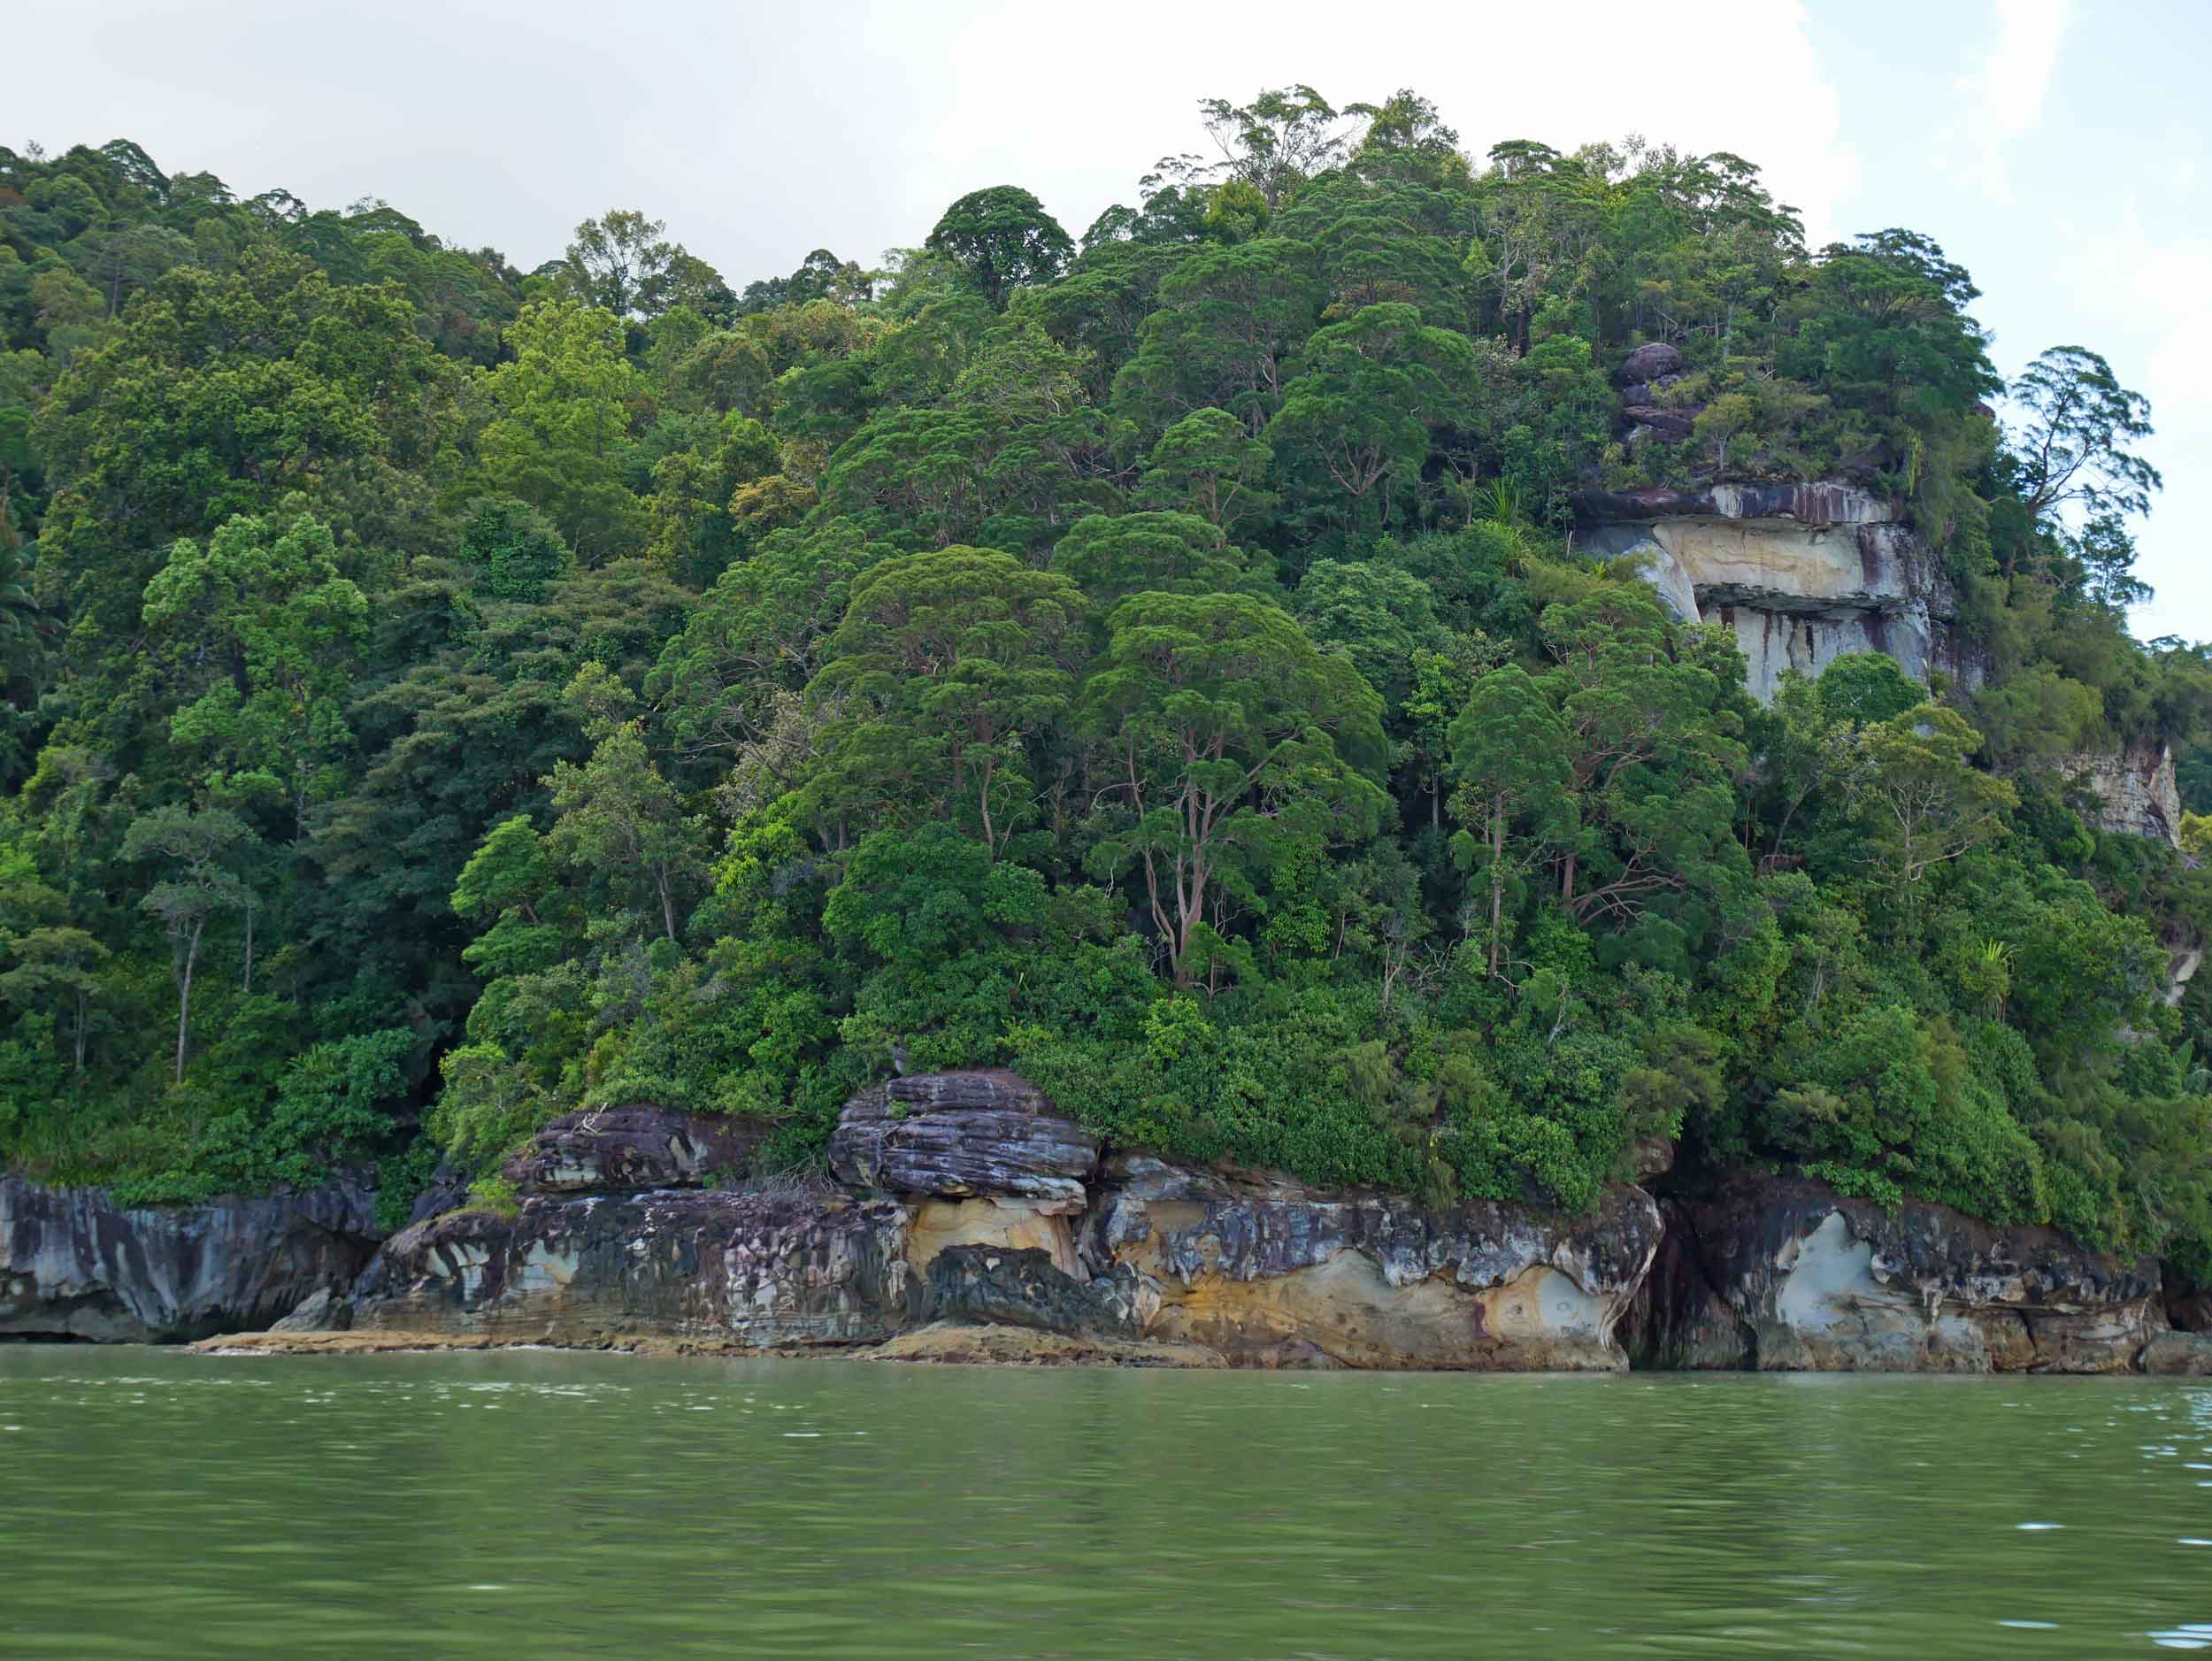  With the coastal cliffs surround Bako, its easy to see why the boat trip is warranted! 